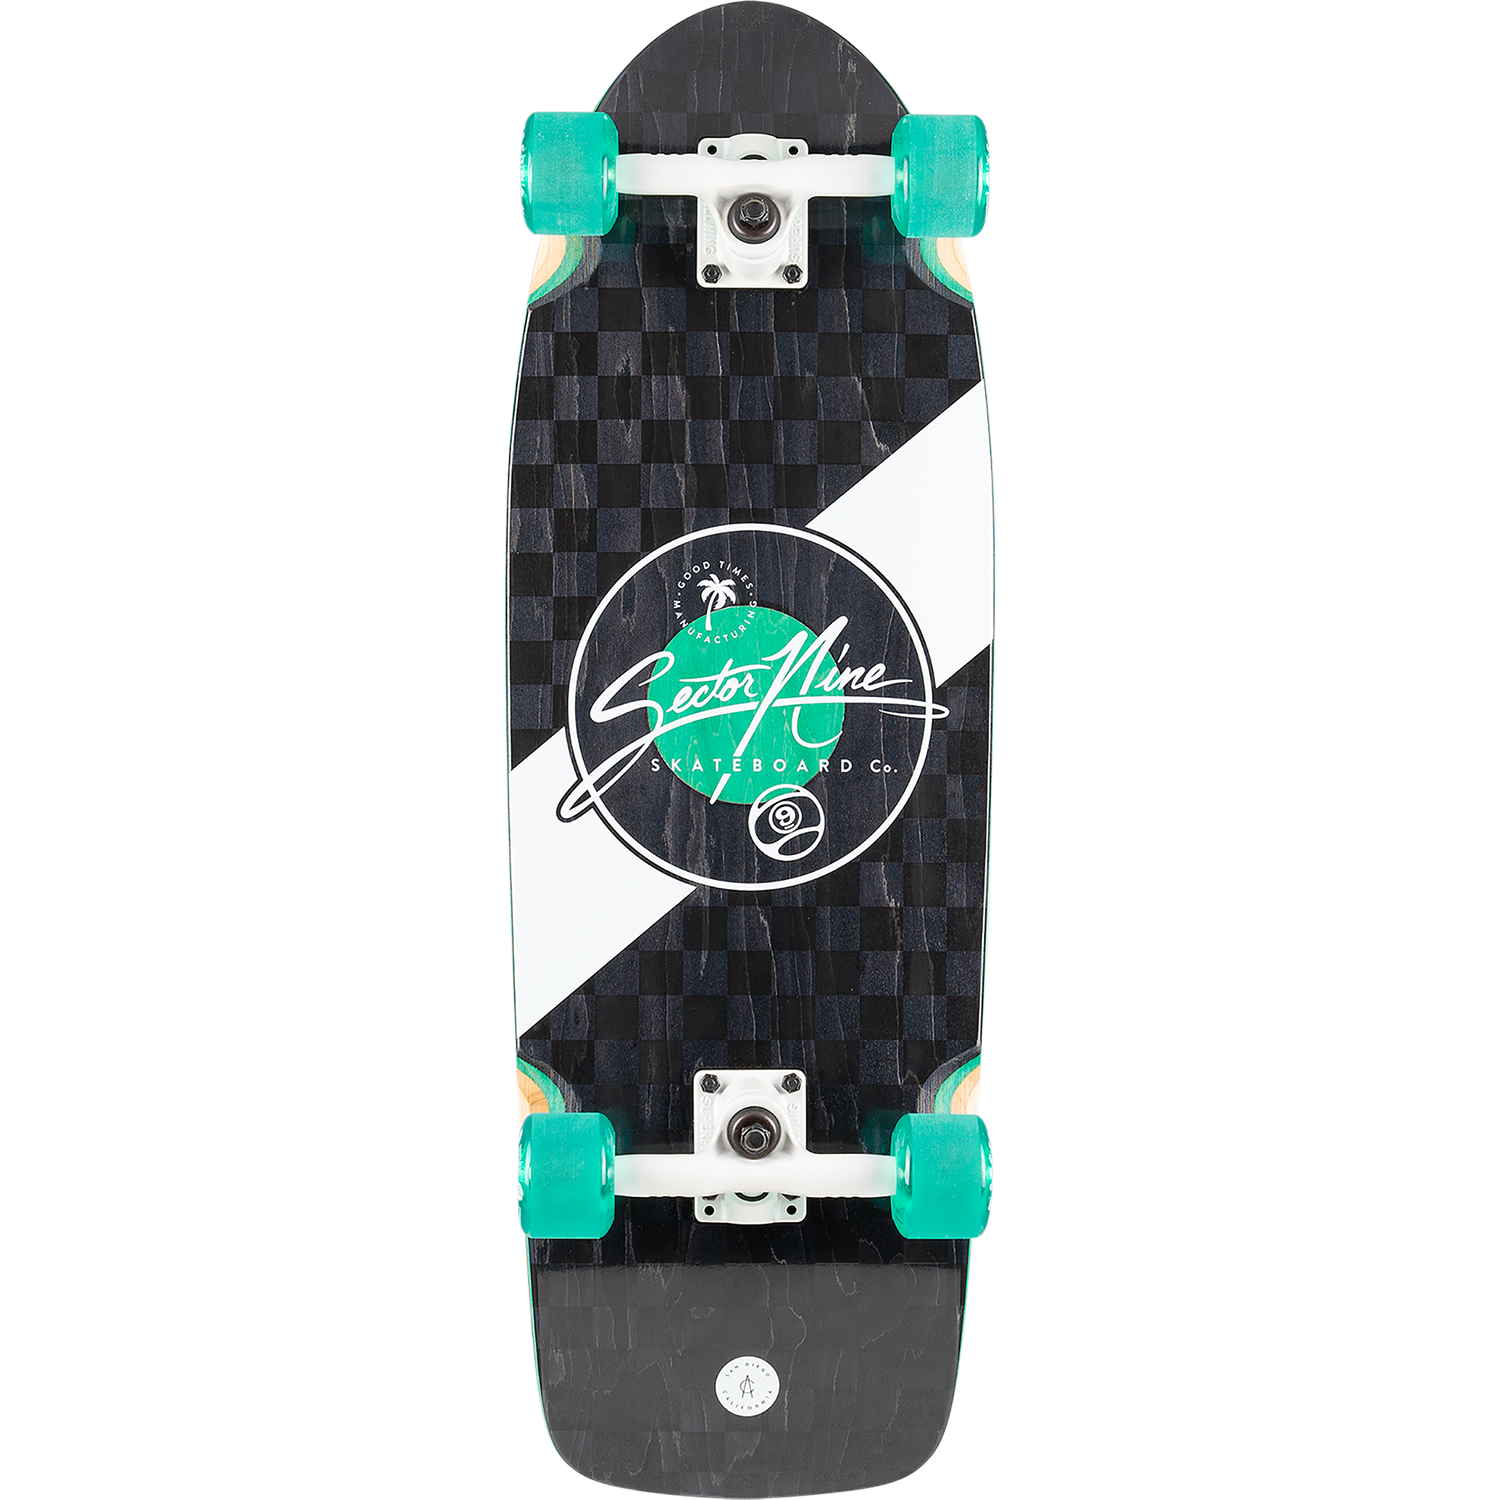 Sector 9 - Mosaic Fat Wave Complete Skateboard - 9.8 x 30